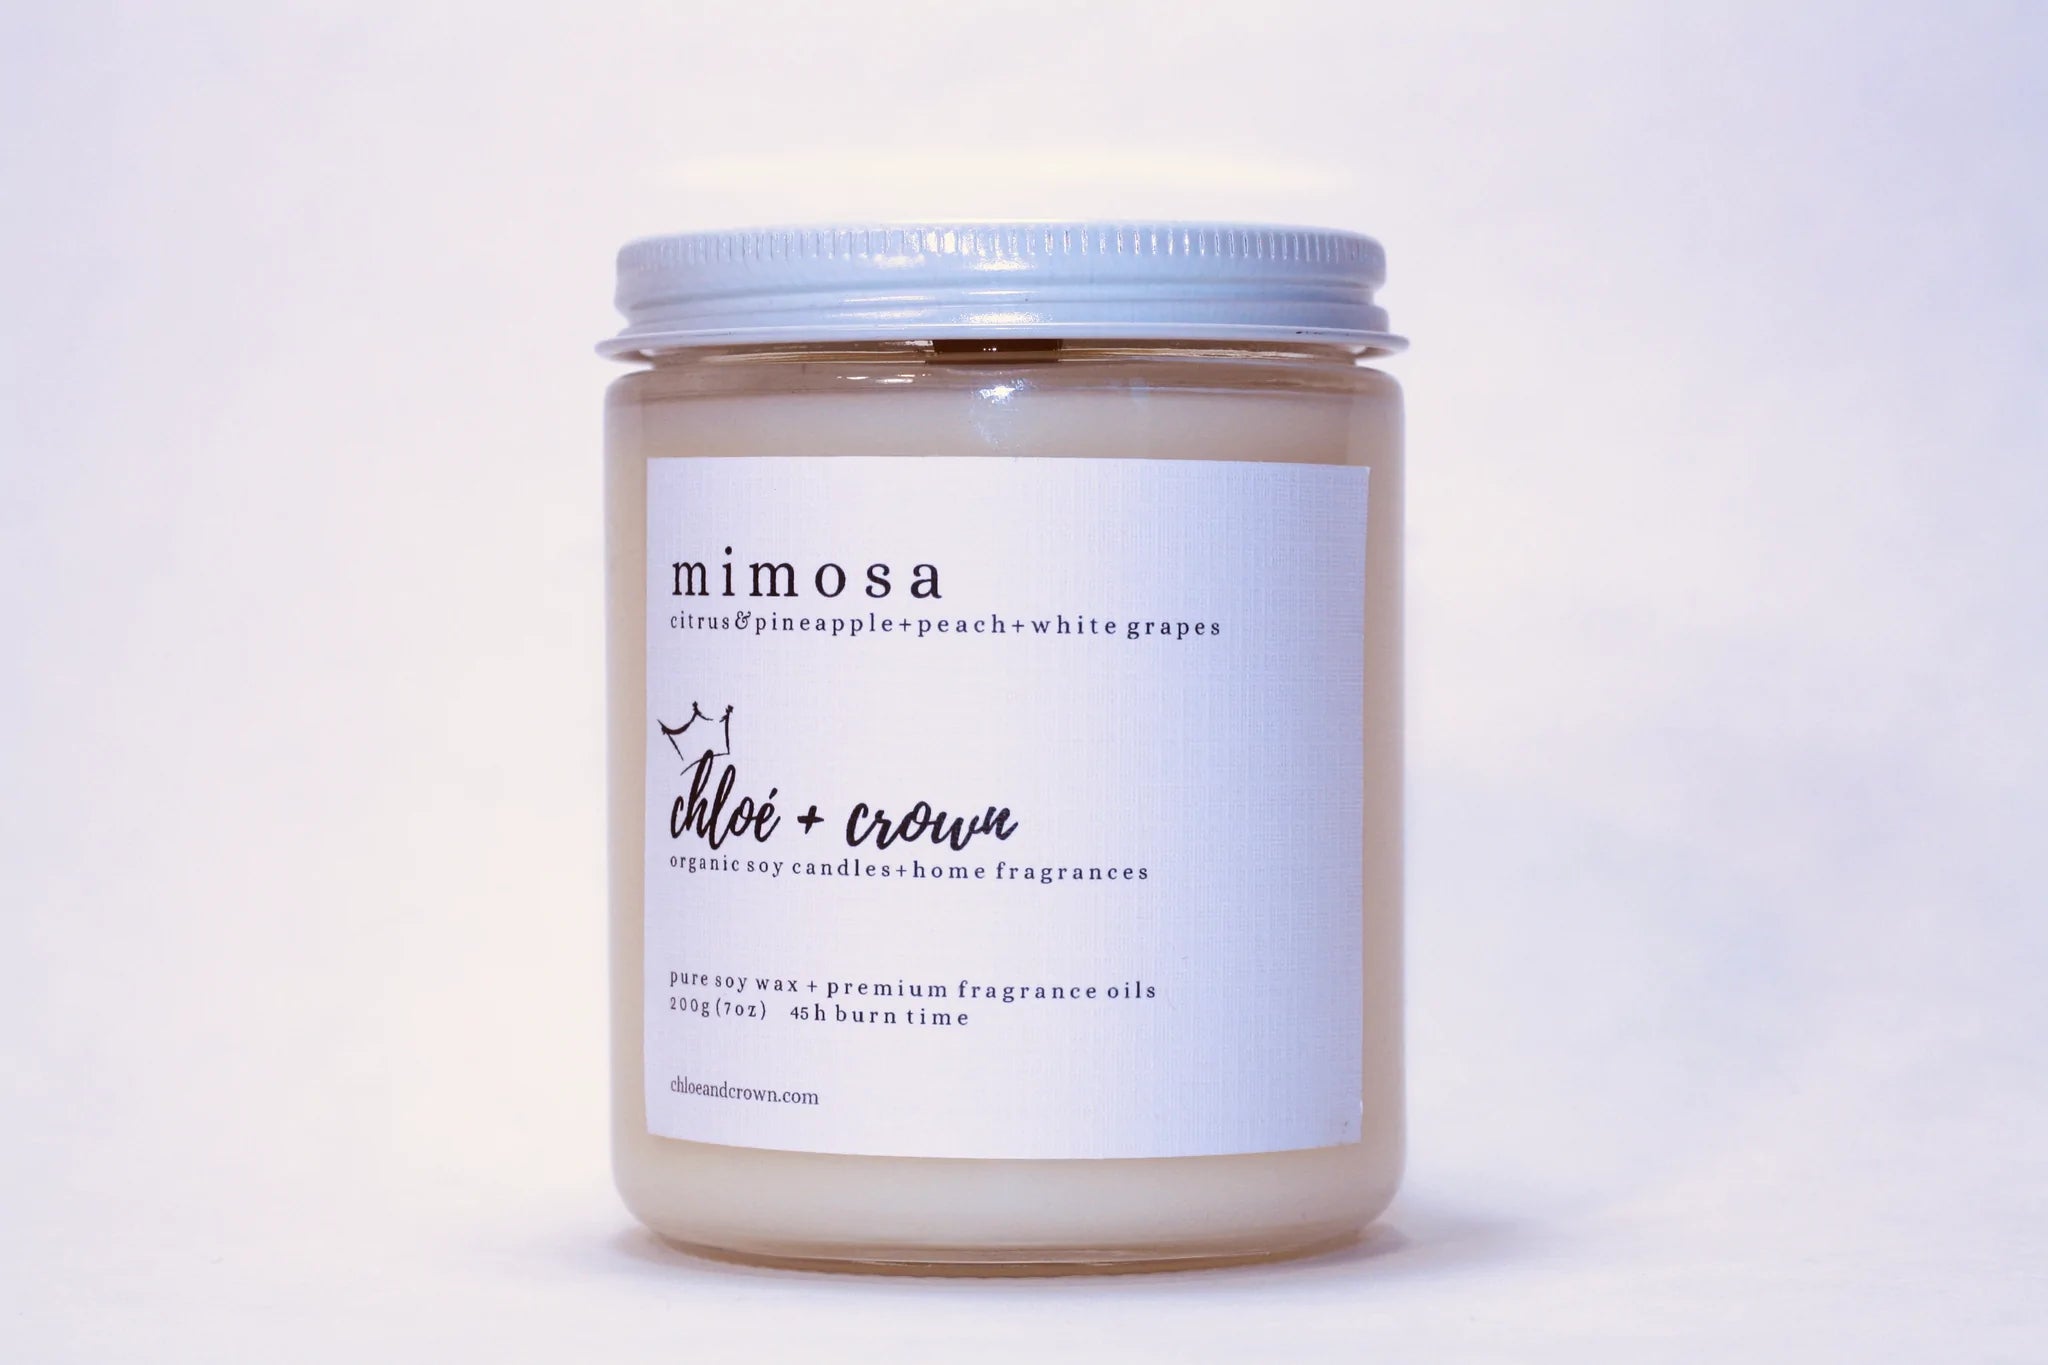 Chloe + crown candle Mimosa Buy in Toronto online or in-store